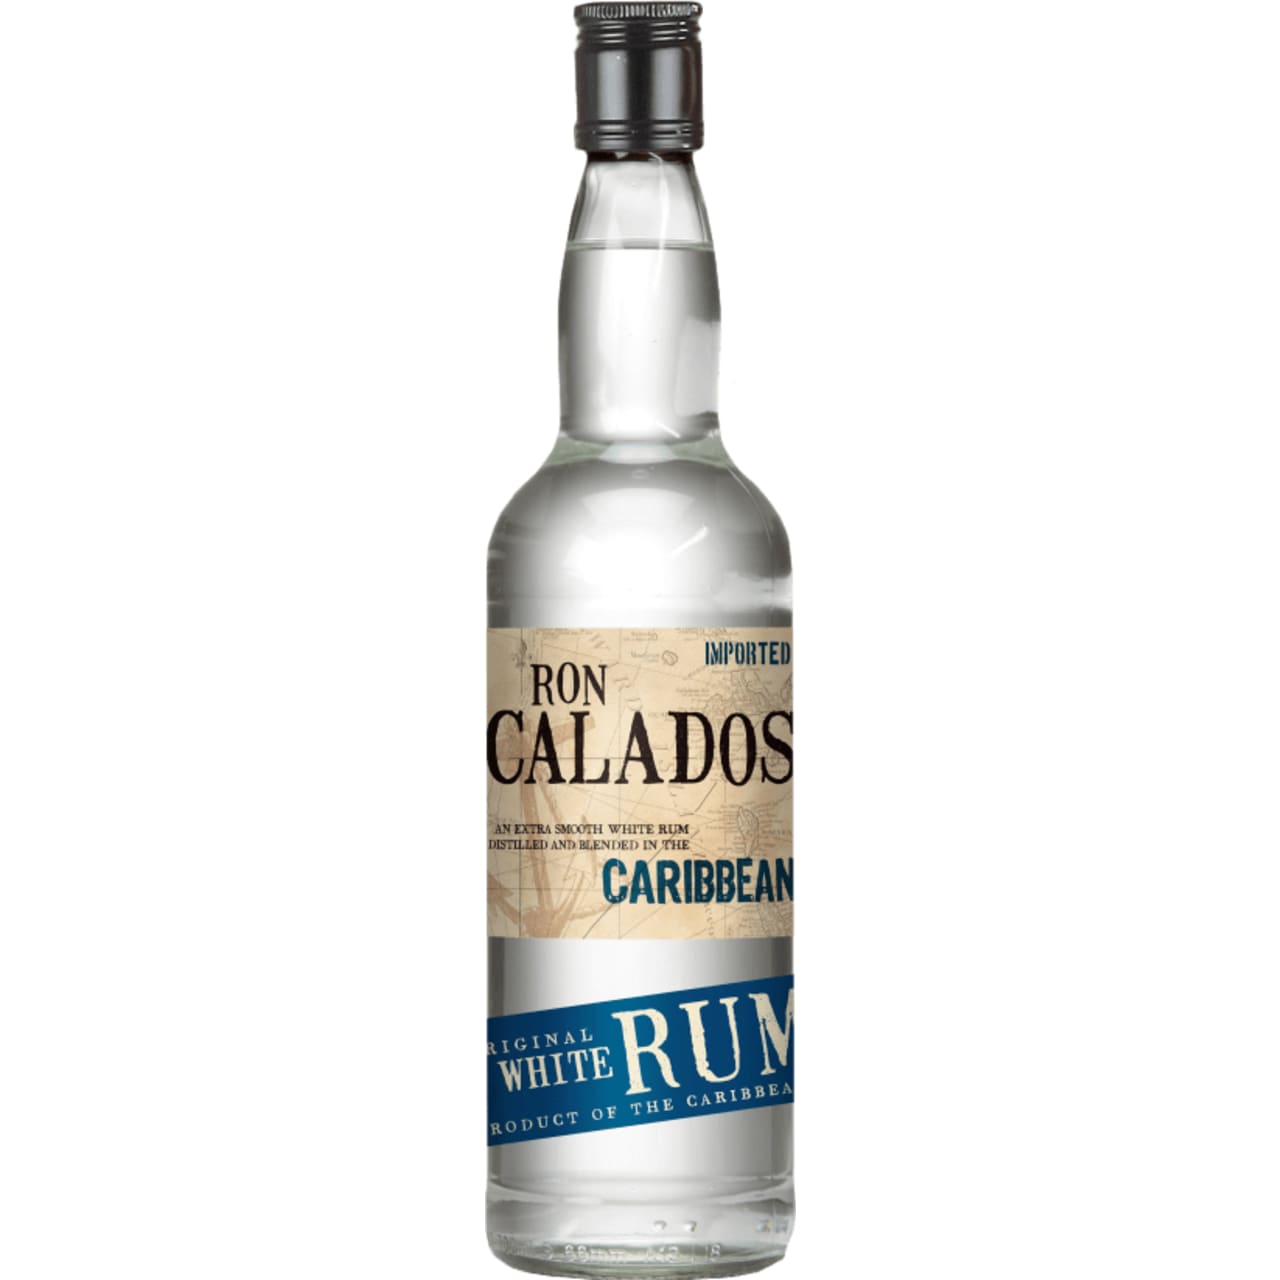 Ron Calados White Rum is a refined smooth style of rum. Light bodied with gentle vanilla notes and a clean finish.